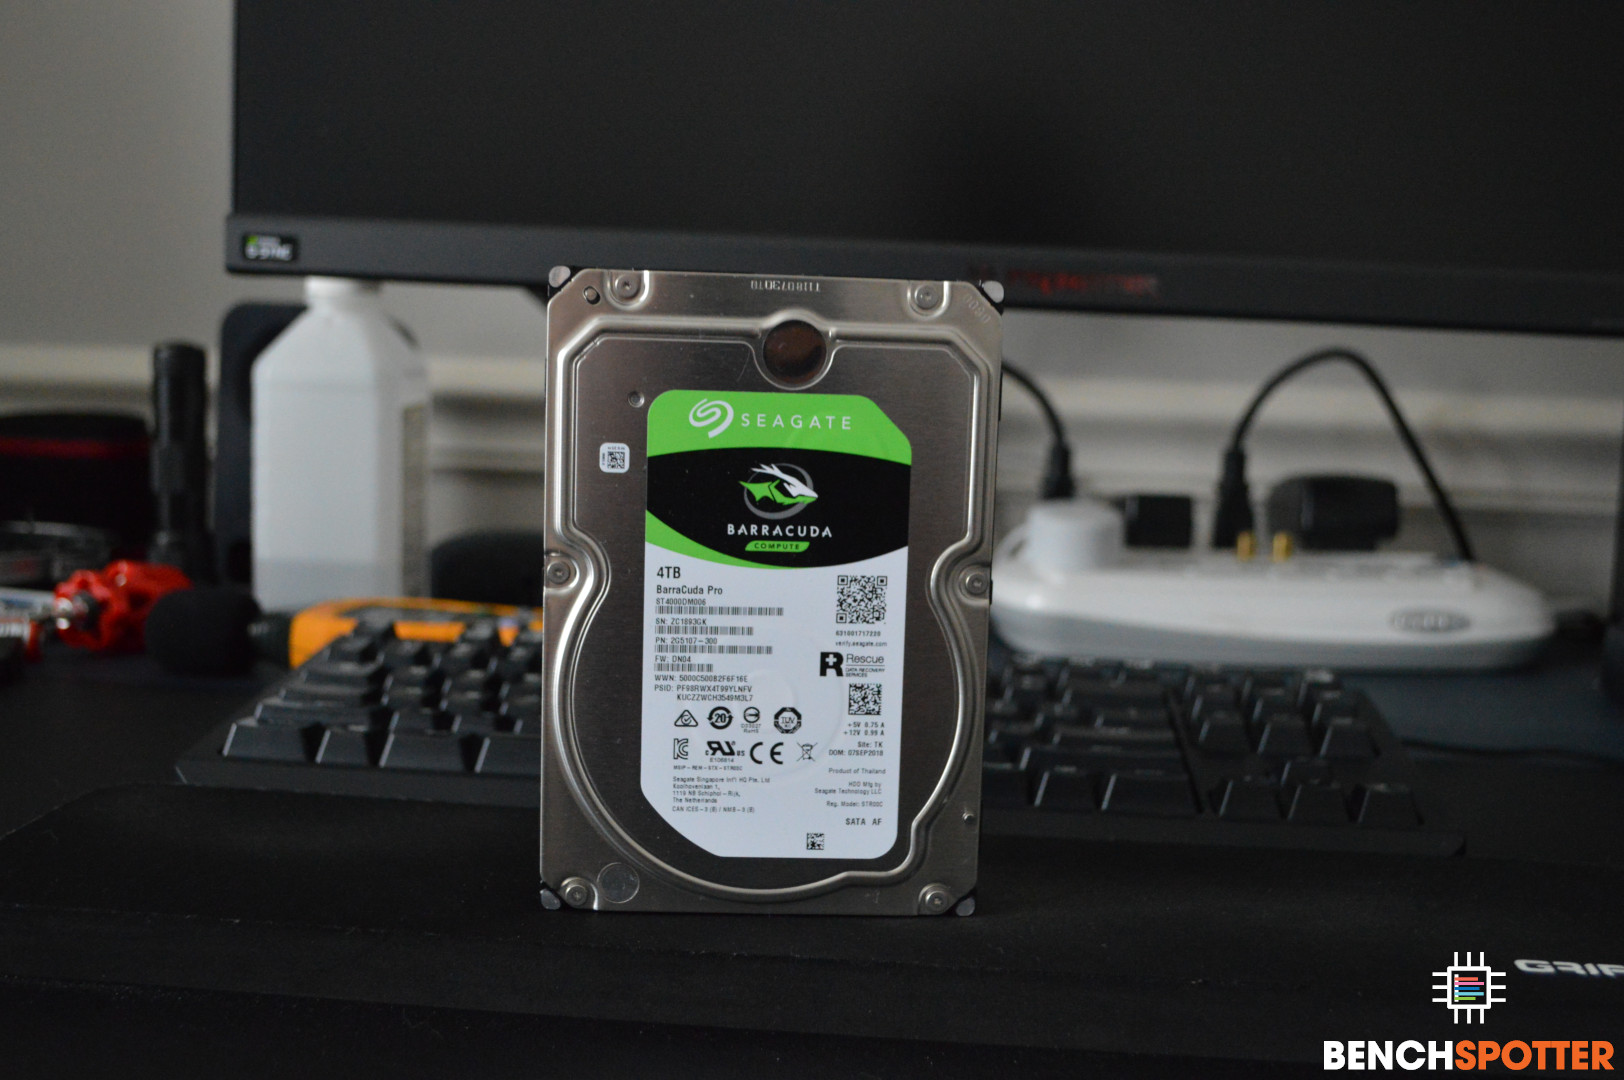 Seagate Barracuda Pro Vs Wd Black Hard Drive Performance Review Benchspotter